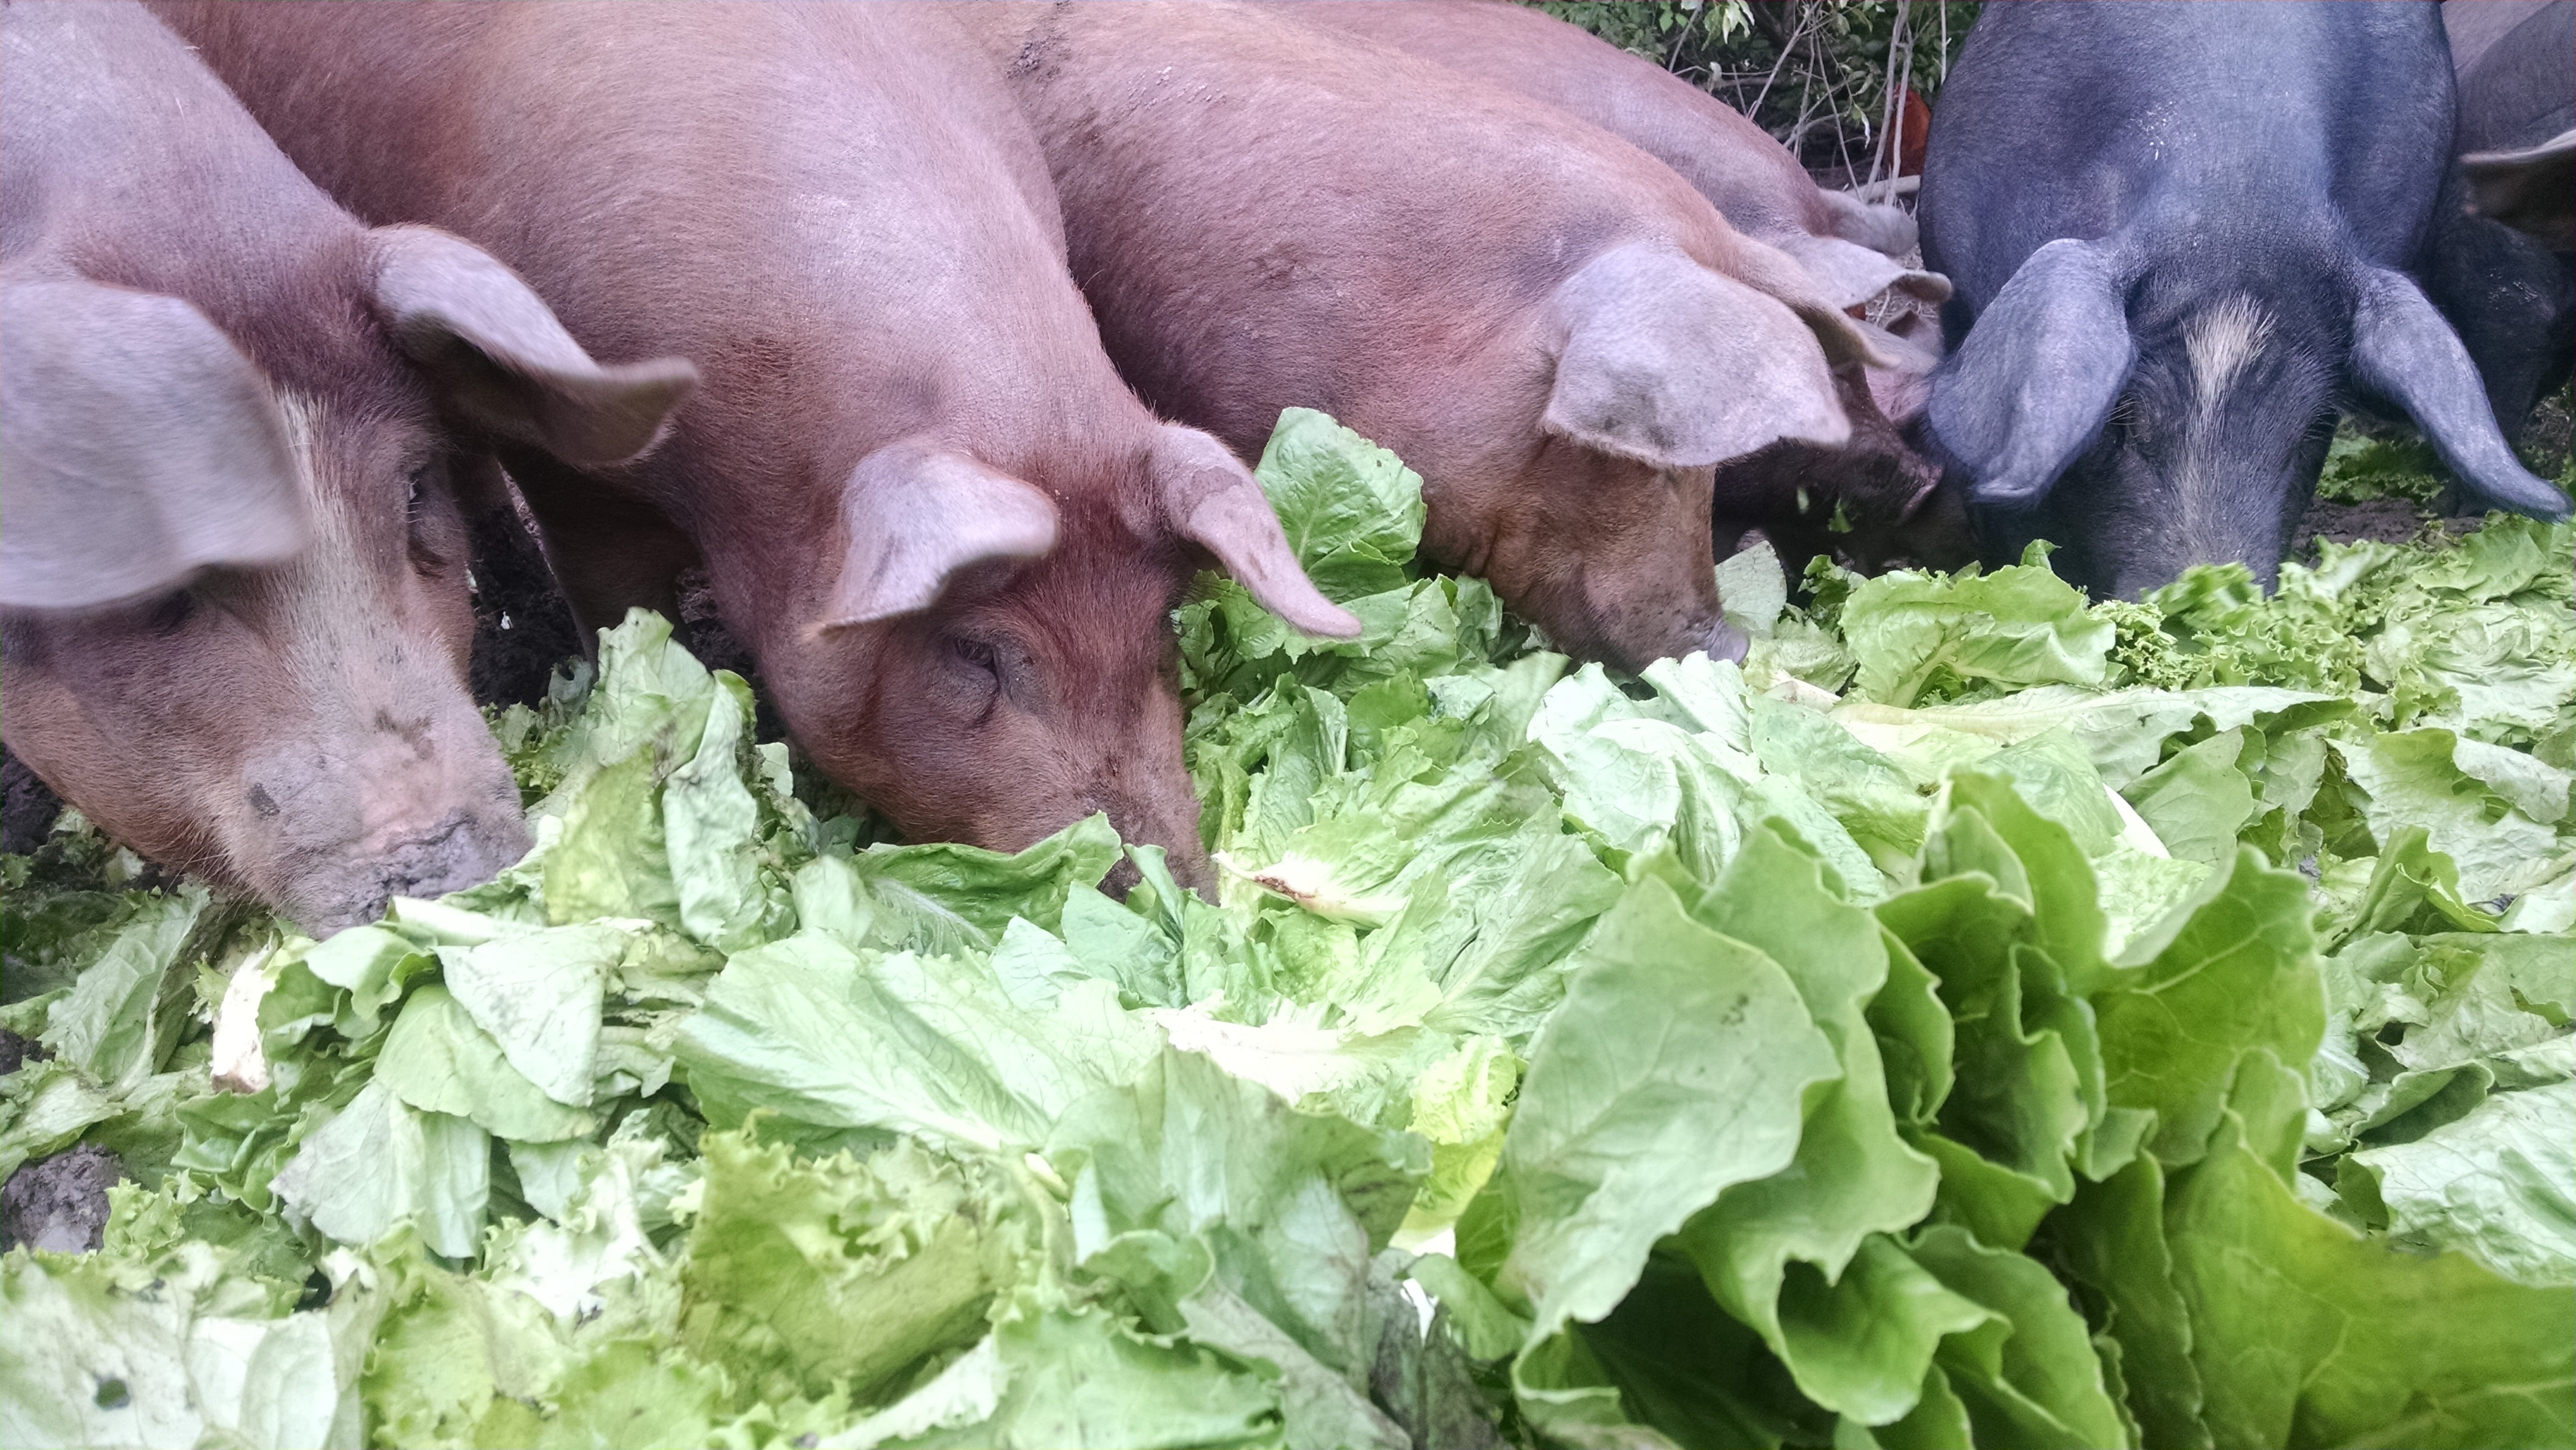 The pigs welcome the lettuce anyway.  Romaine and green leaf were on the menu.  Most of the heads were still crisp with just a little blackening on the edges.